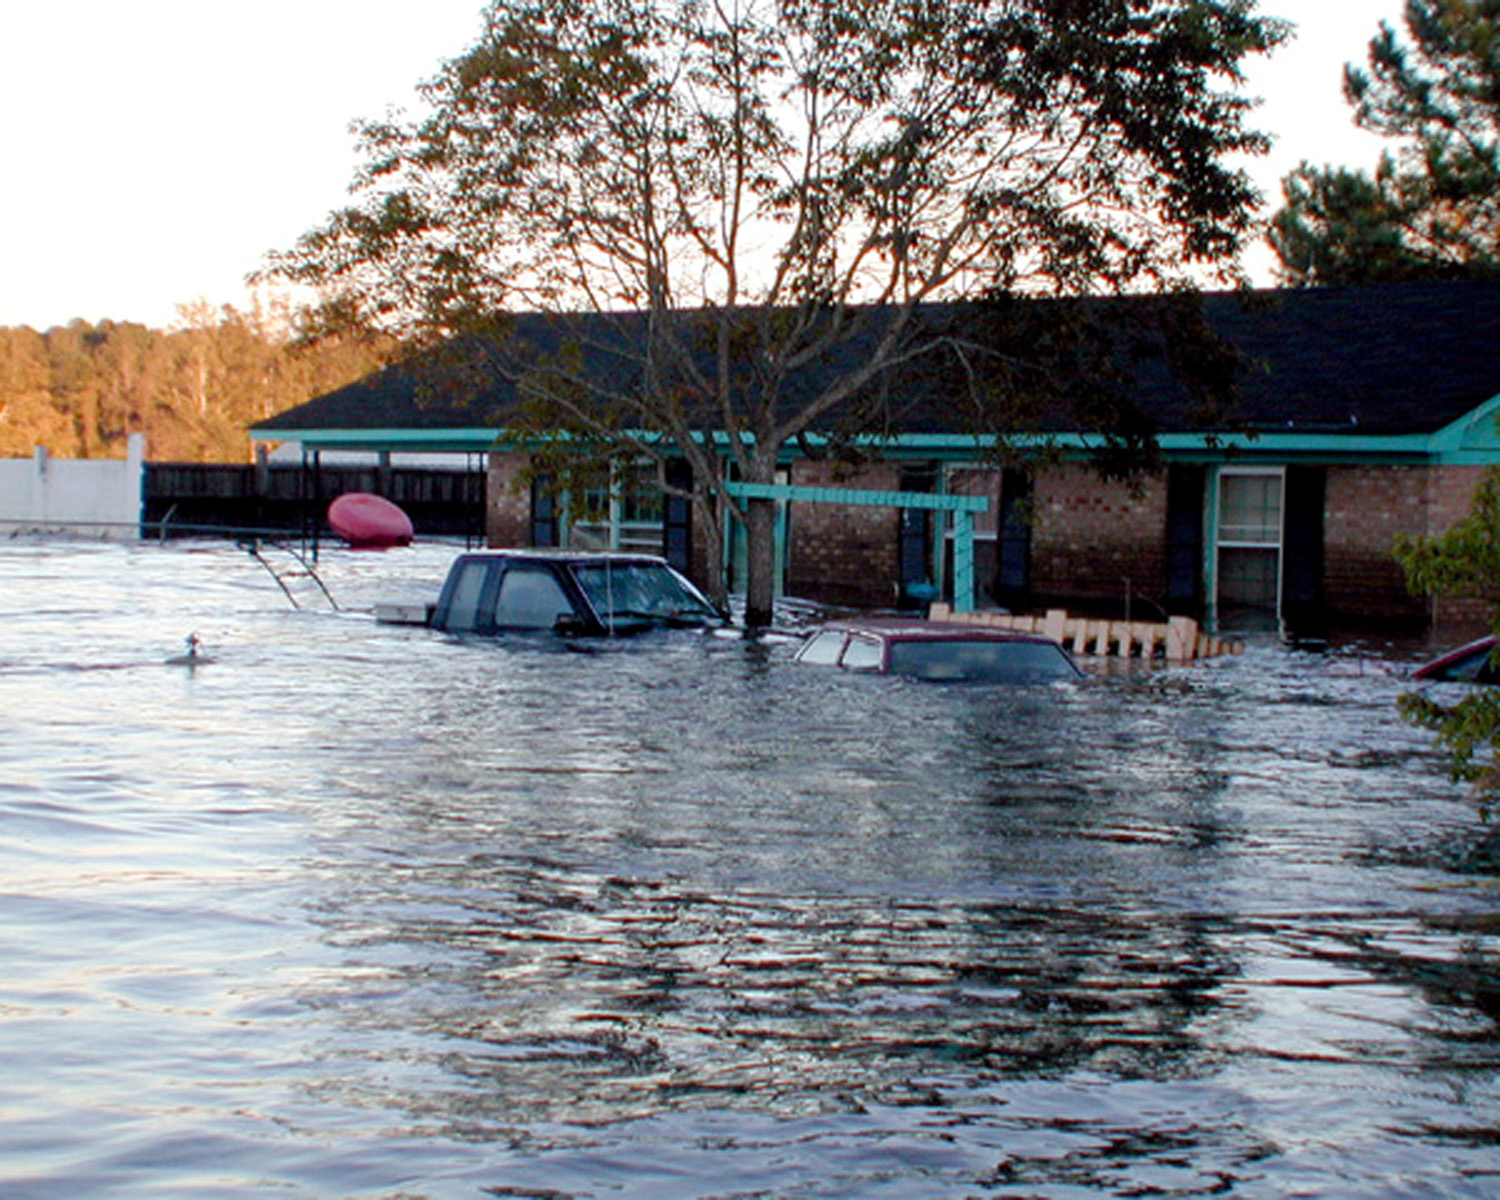 High floodwaters drown vehicles and houses.